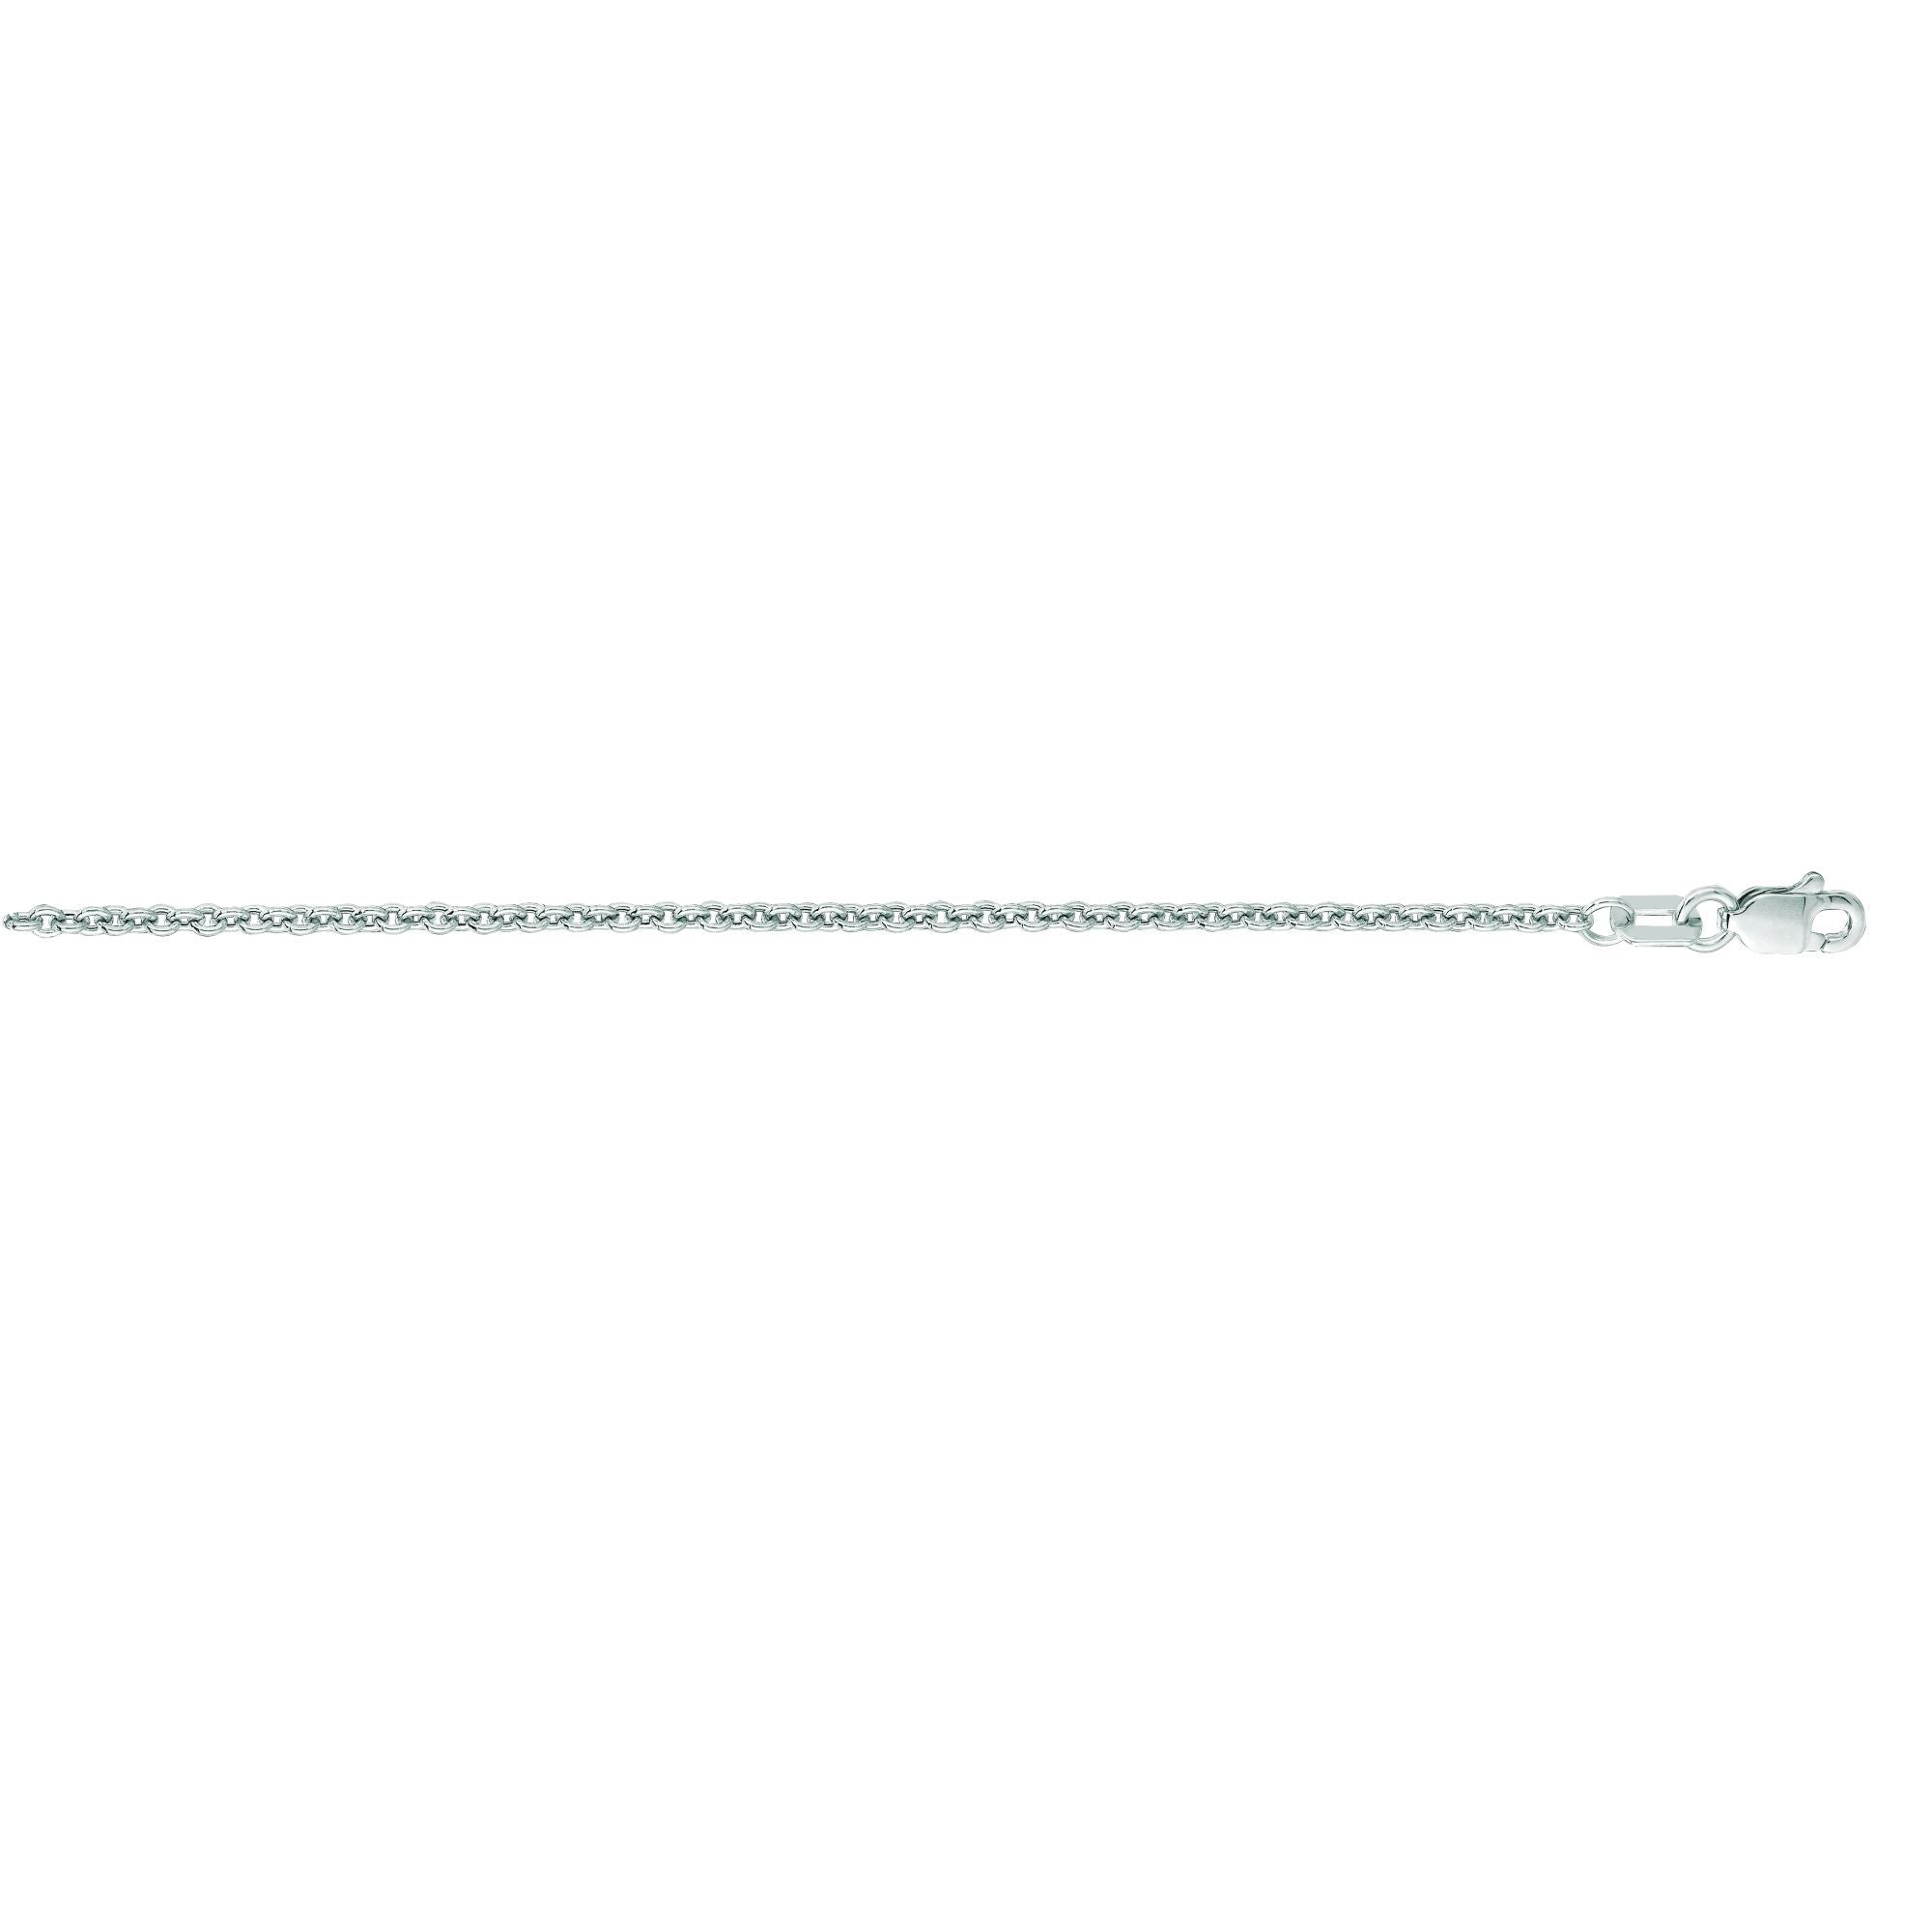 Finished and Shiny Diamond Cut Lite Forsantina Chain Lobster Clasp - wingroupjewelry